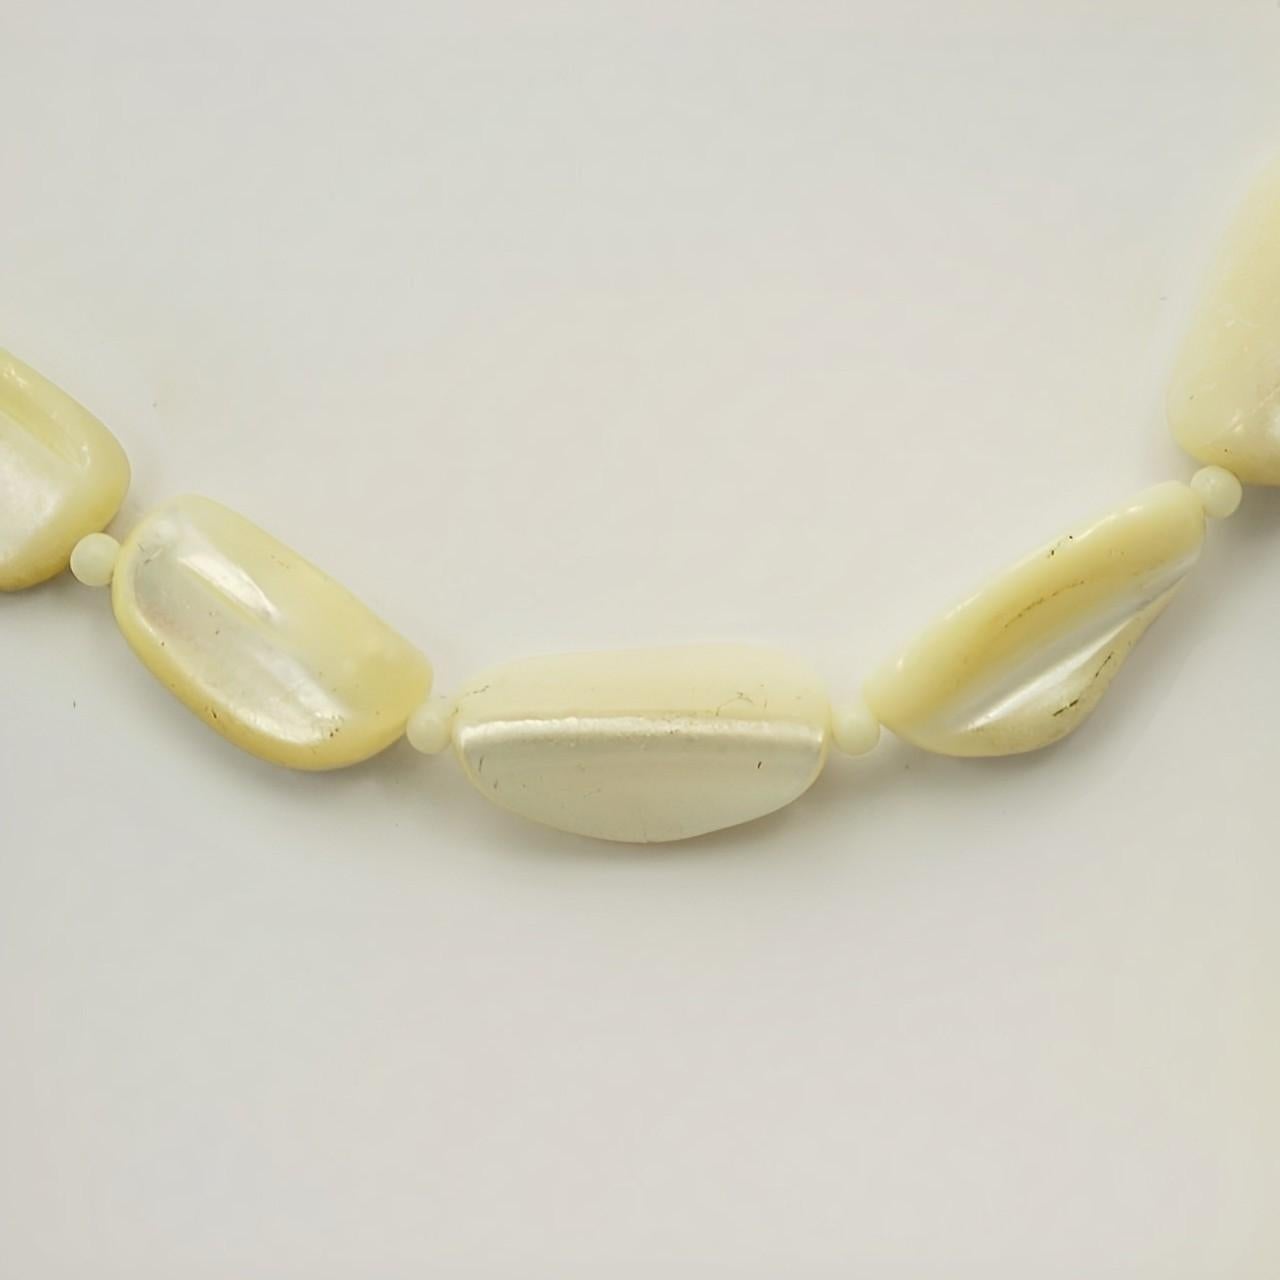 mother of pearl beads necklace